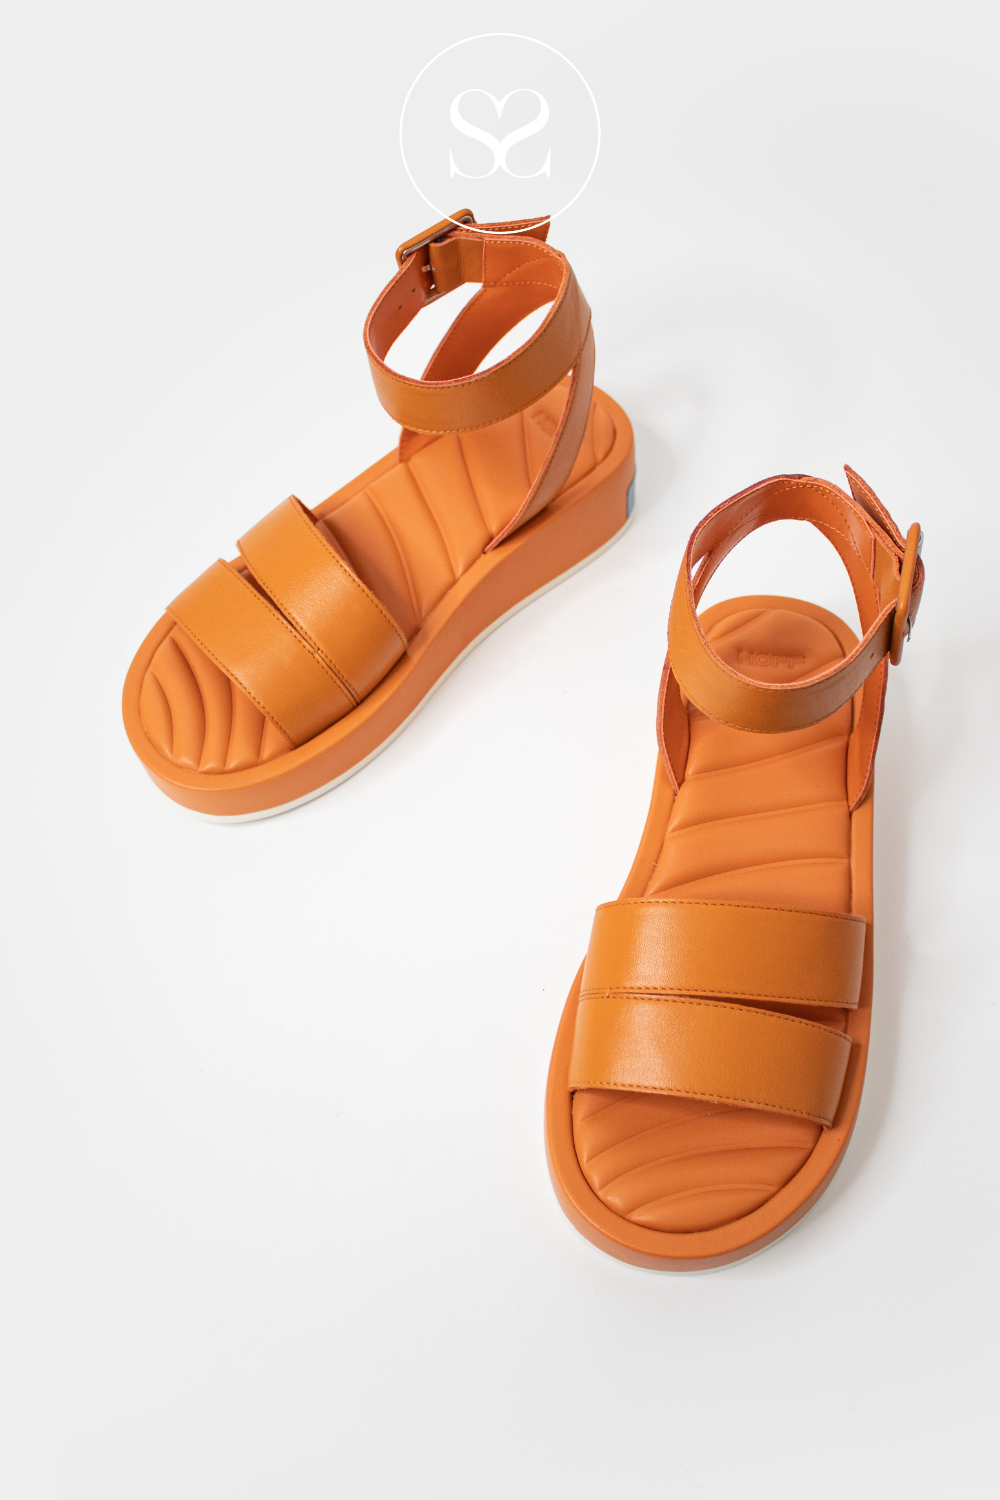 CHUNKY SANDALS WITH ANKLE STRAP FOR WOMEN - ORANGE LEATHER